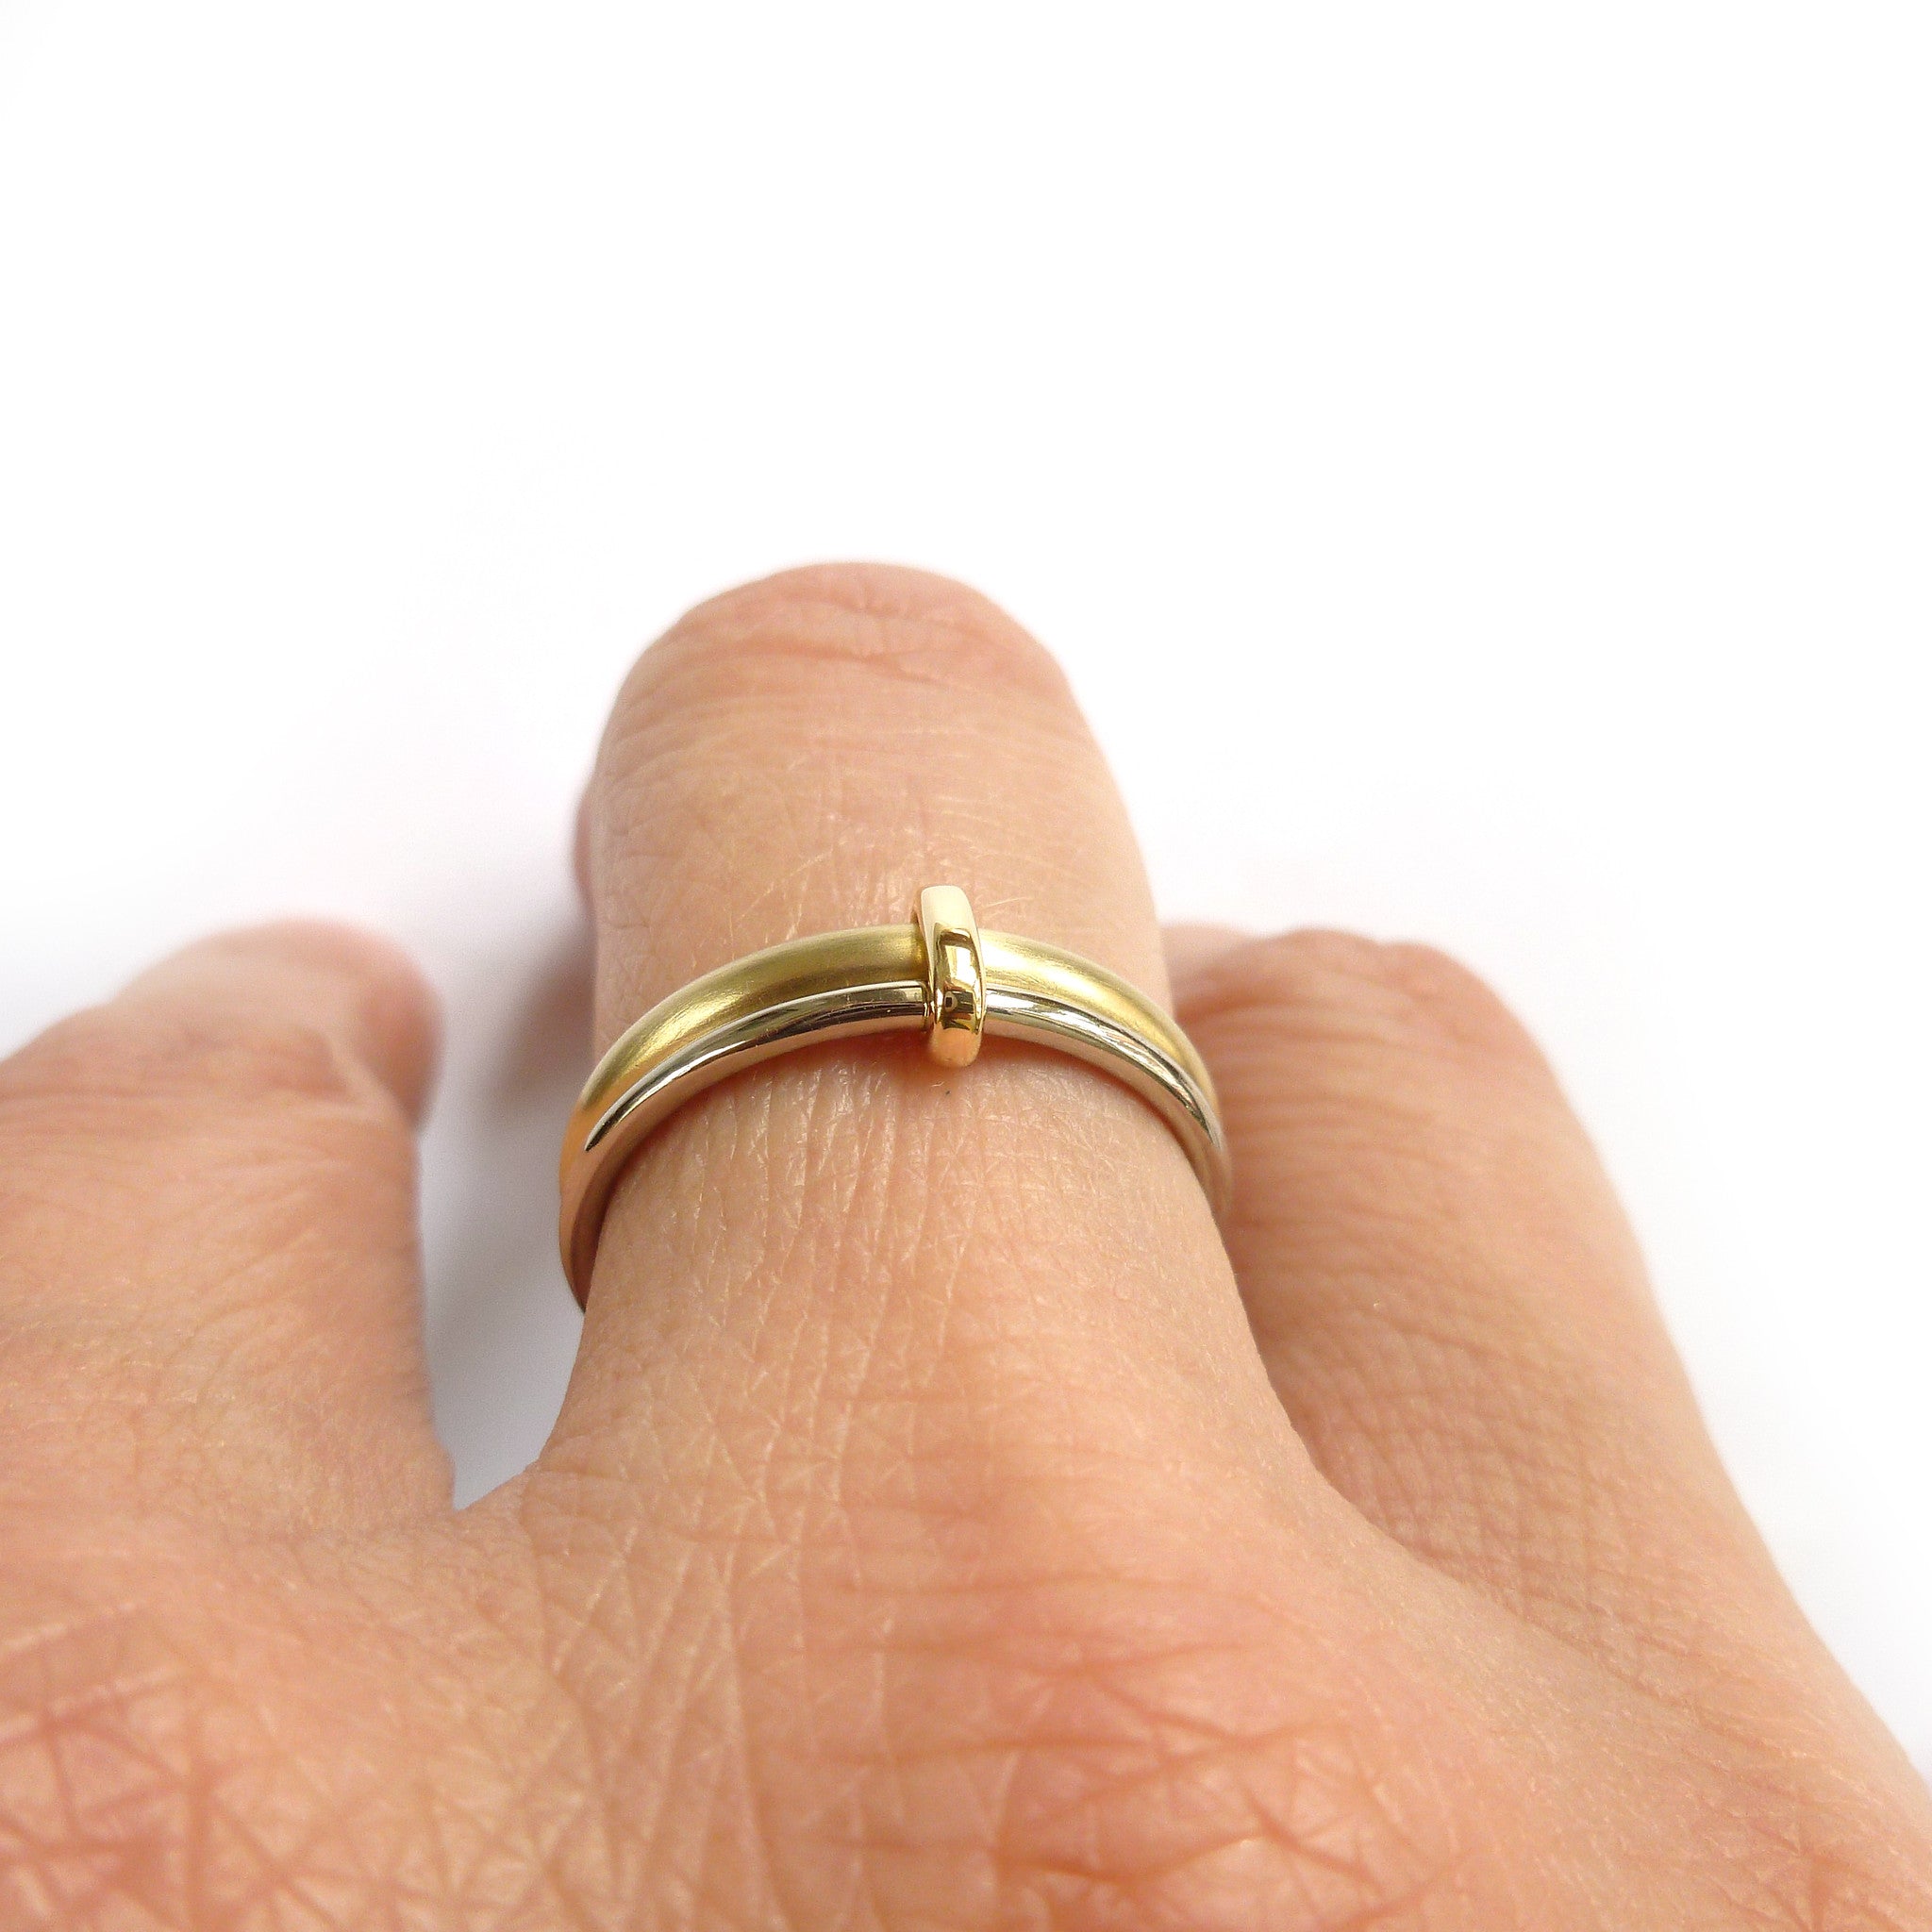 unique wedding ring linking together two bands of gold